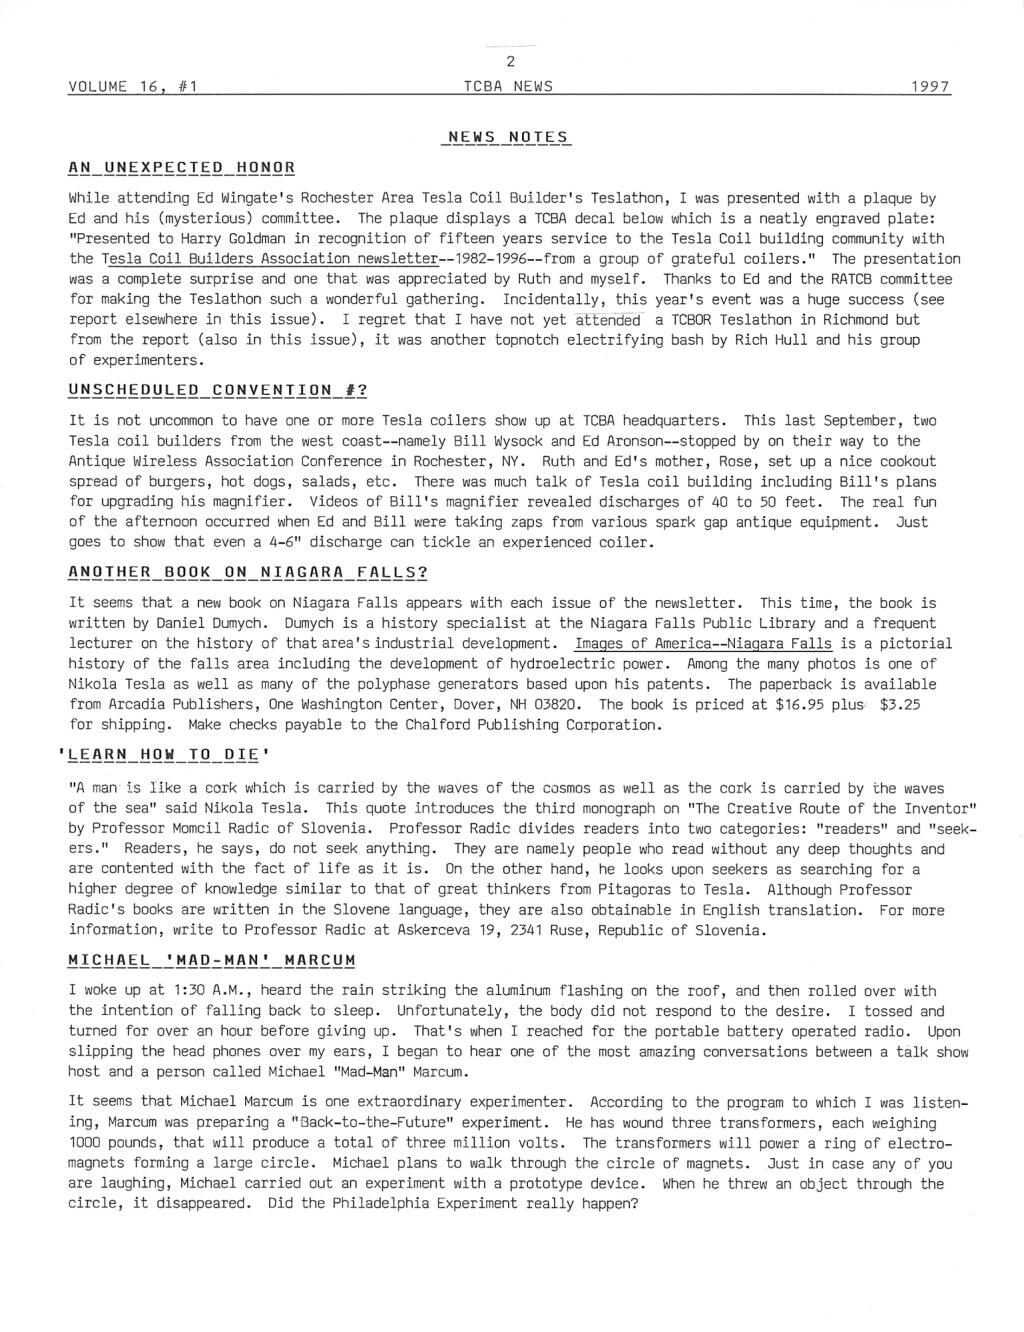 TCBA Volume 16 - Issue 1 - Page 2 of 18